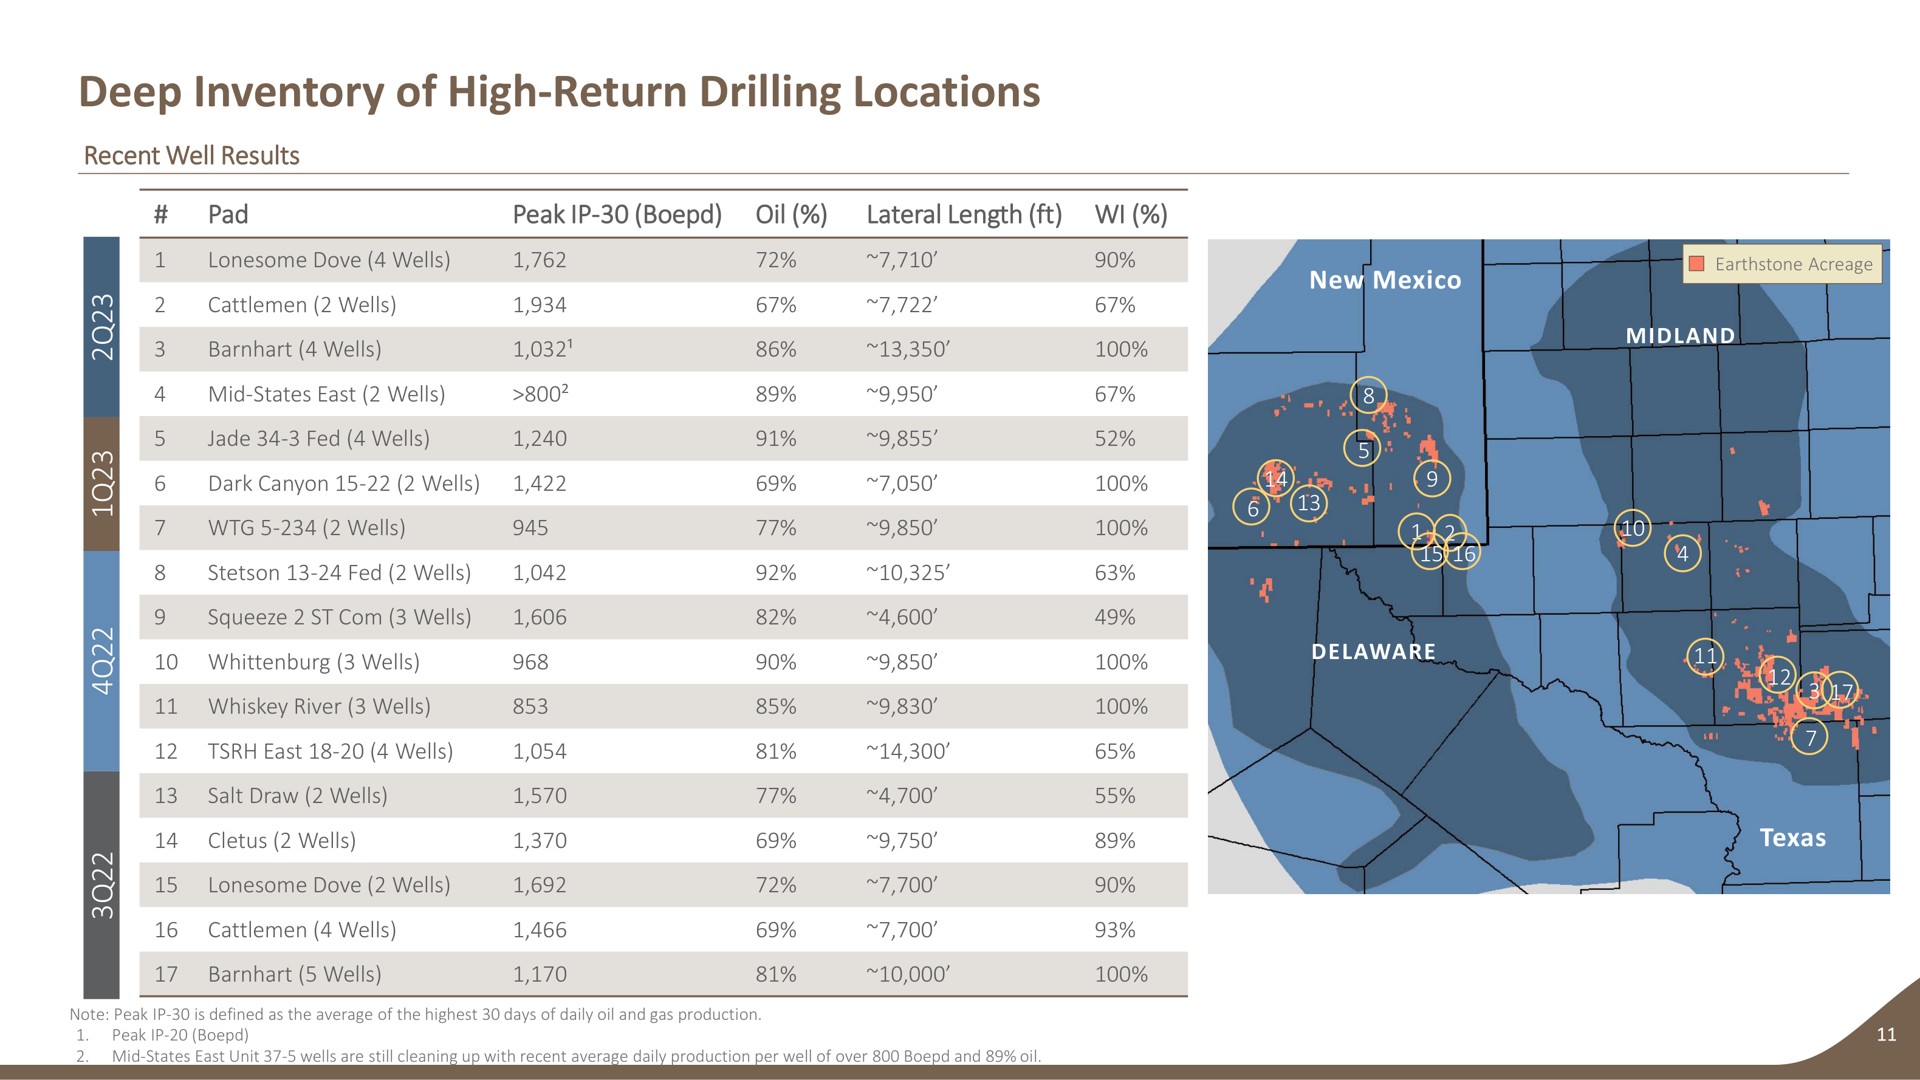 deep inventory of high return drilling locations recent well results pad peak oil lateral length new lonesome dove wells cattlemen wells wells mid states east wells jade fed wells fed wells squeeze wells whiskey river wells east wells salt draw wells wells lonesome dove wells cattlemen wells wells tang too an | Earthstone Energy